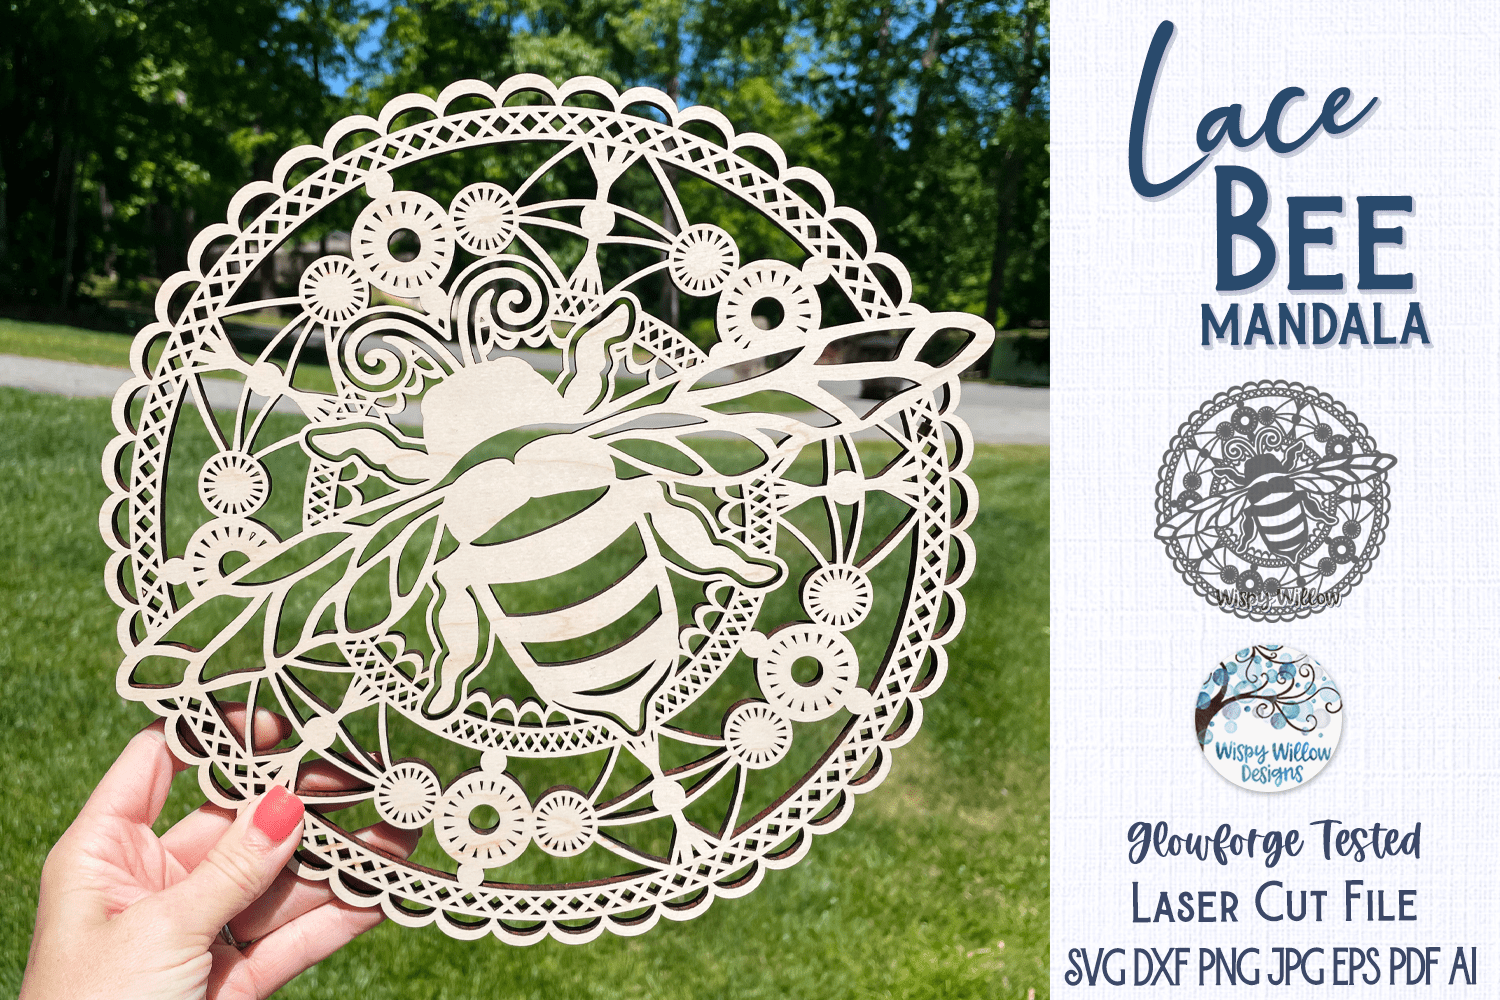 Lace Bee Mandala for Laser or Glowforge Wispy Willow Designs Company